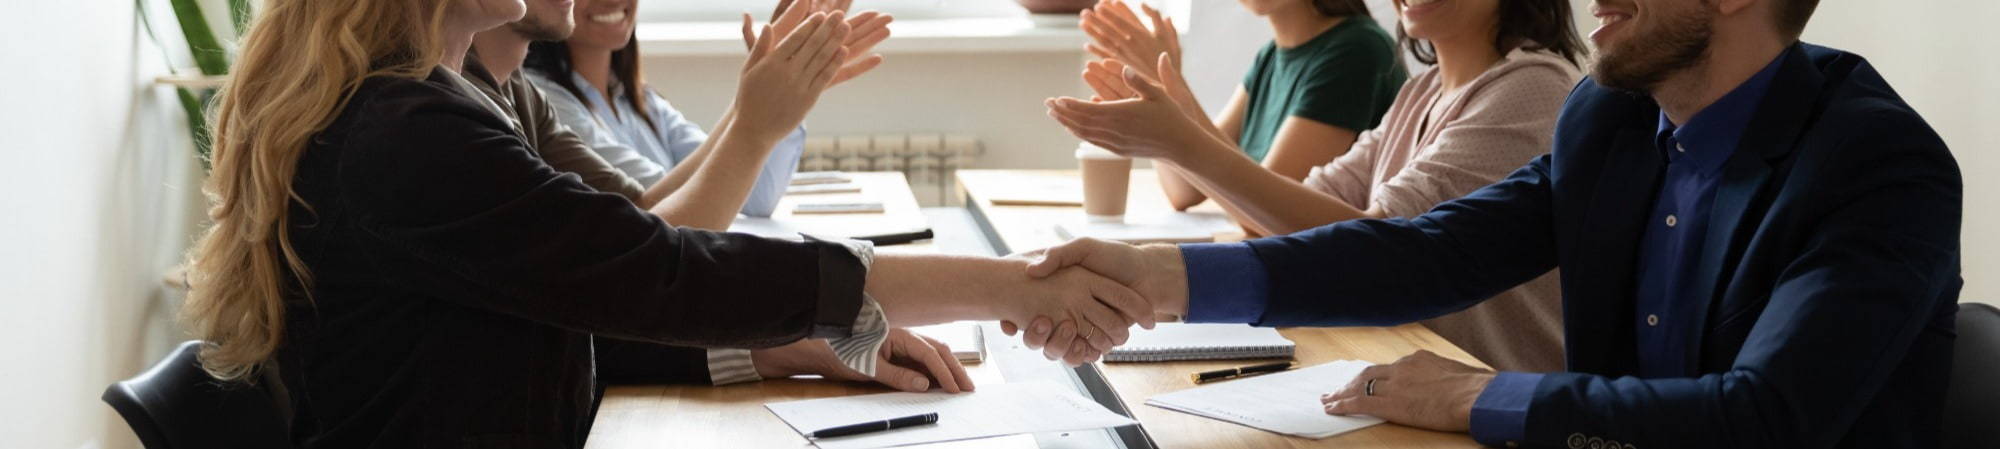 A woman and a man shake hands during business meeting cropped